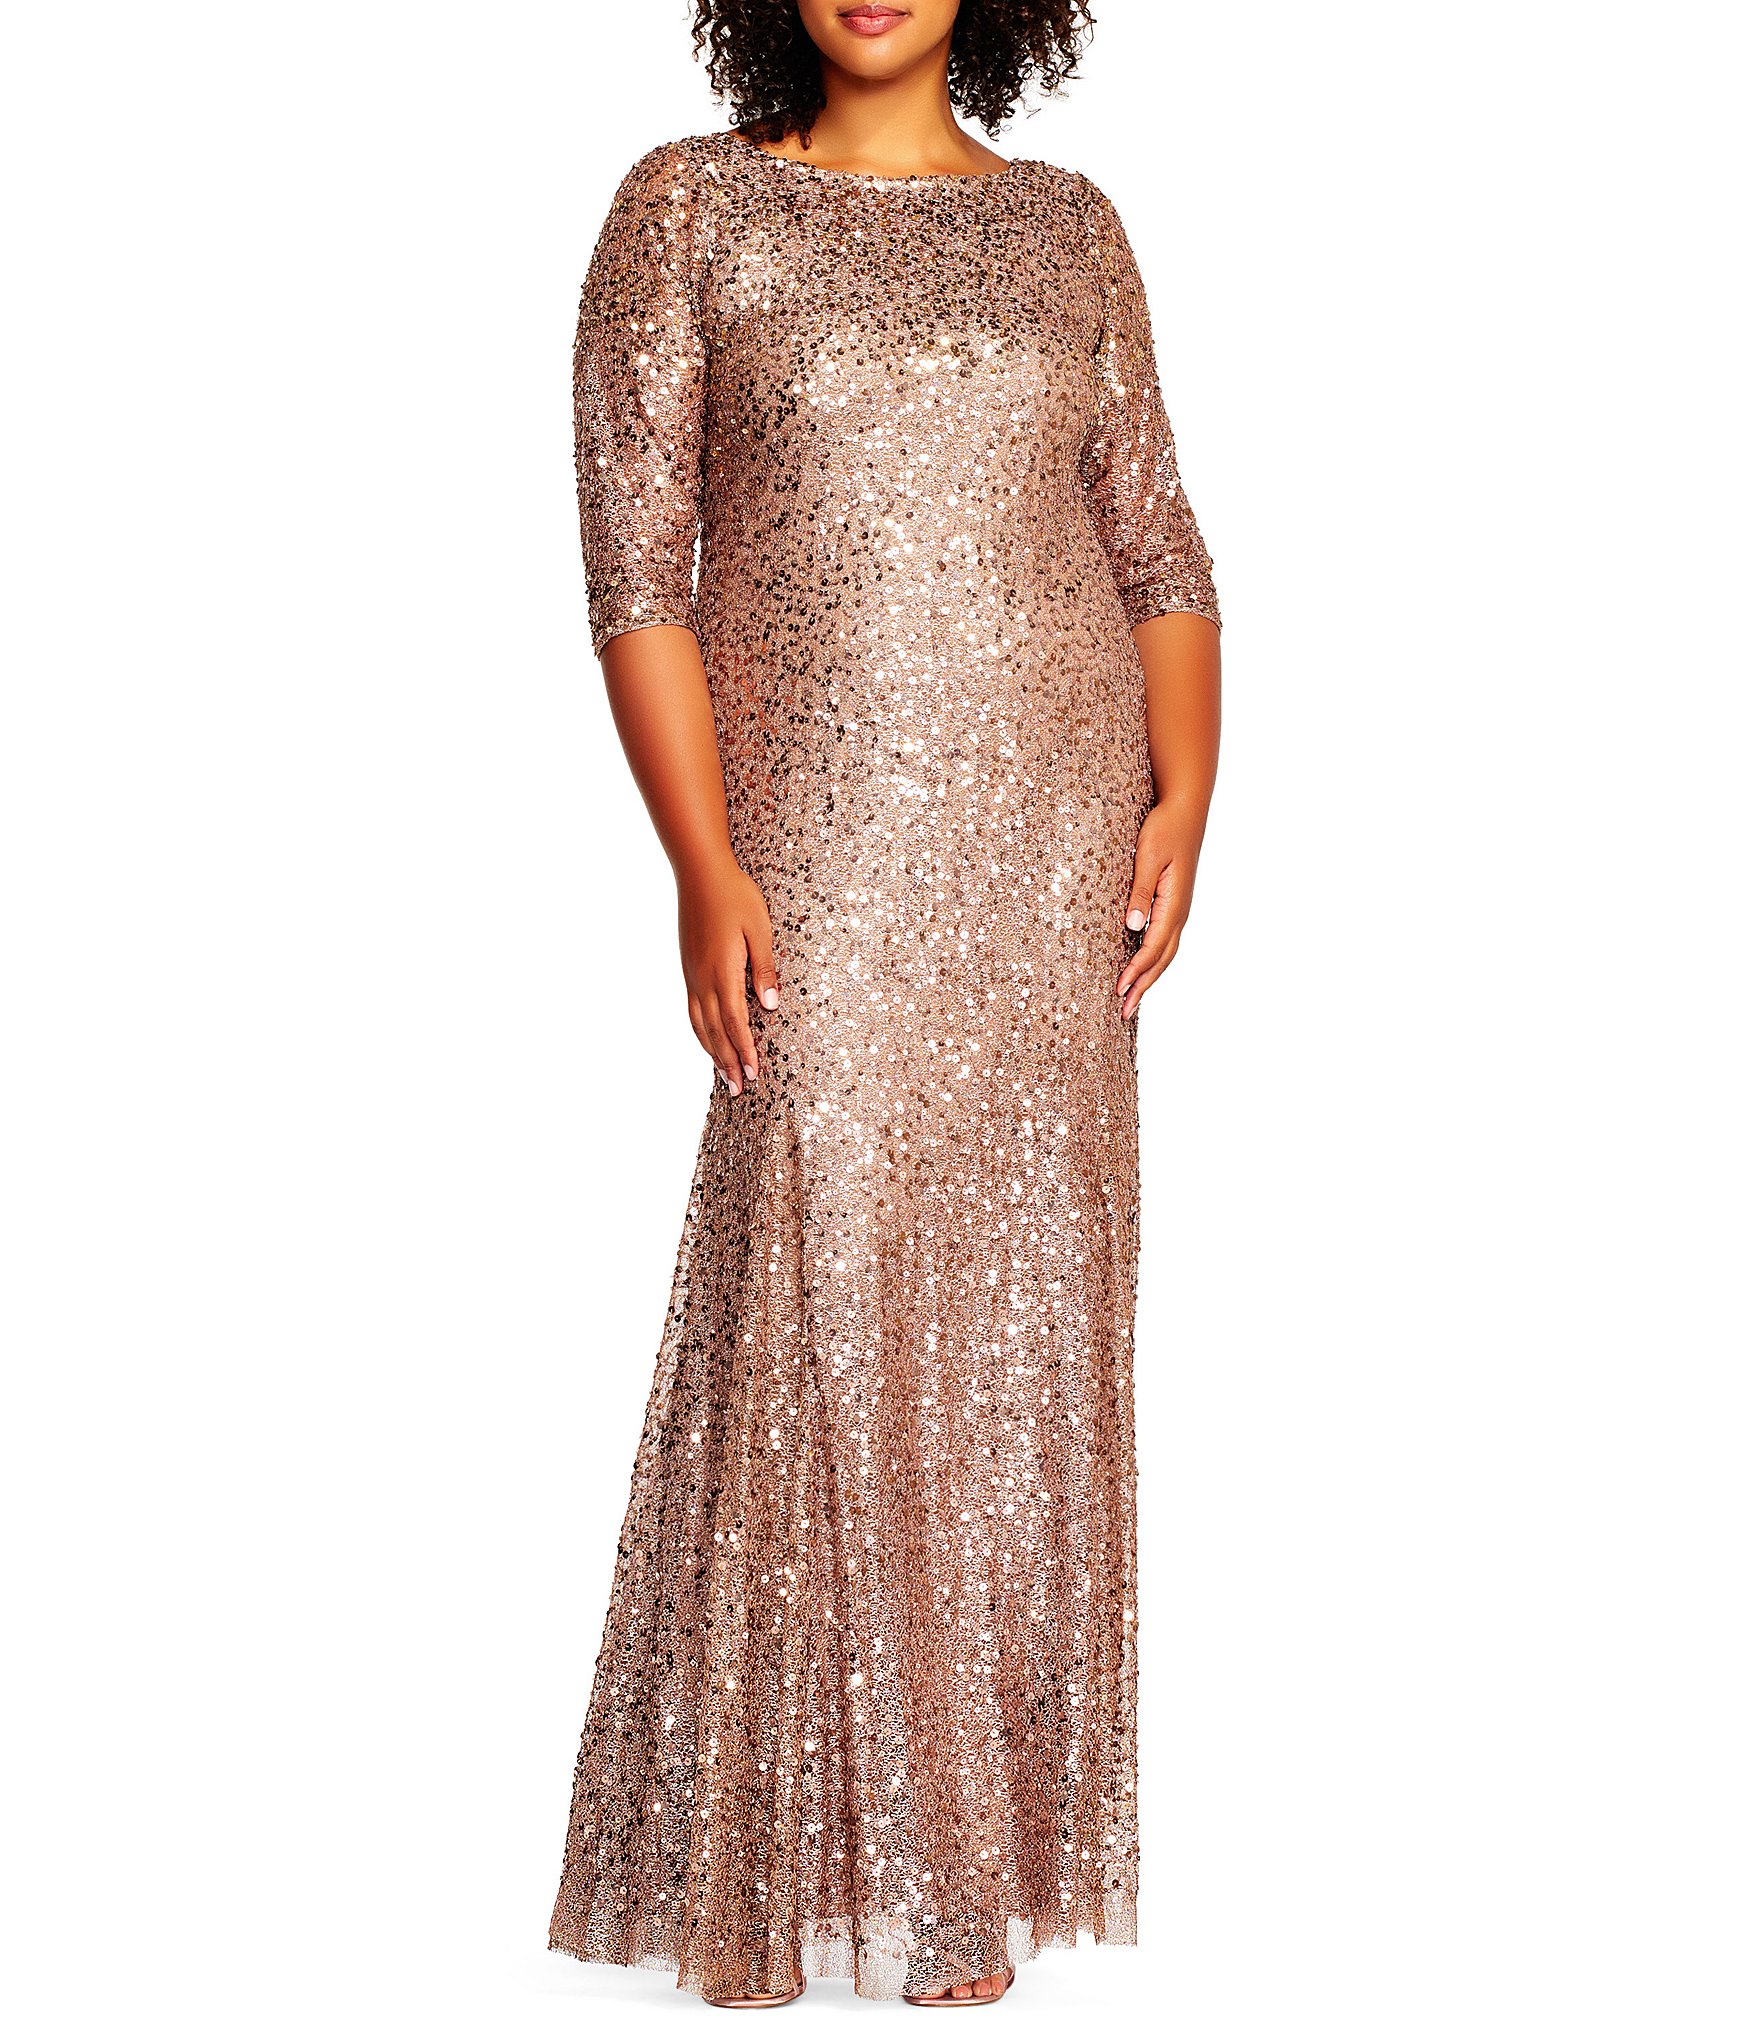 https://www.dillards.com/p/adrianna-papell-plus-long-sleeve-beaded-gown/507281330?di=05088211_zi_dark_rose_gold&categoryId=3100&facetCache=pageSize%3D96%26beginIndex%3D0%26orderBy%3D1